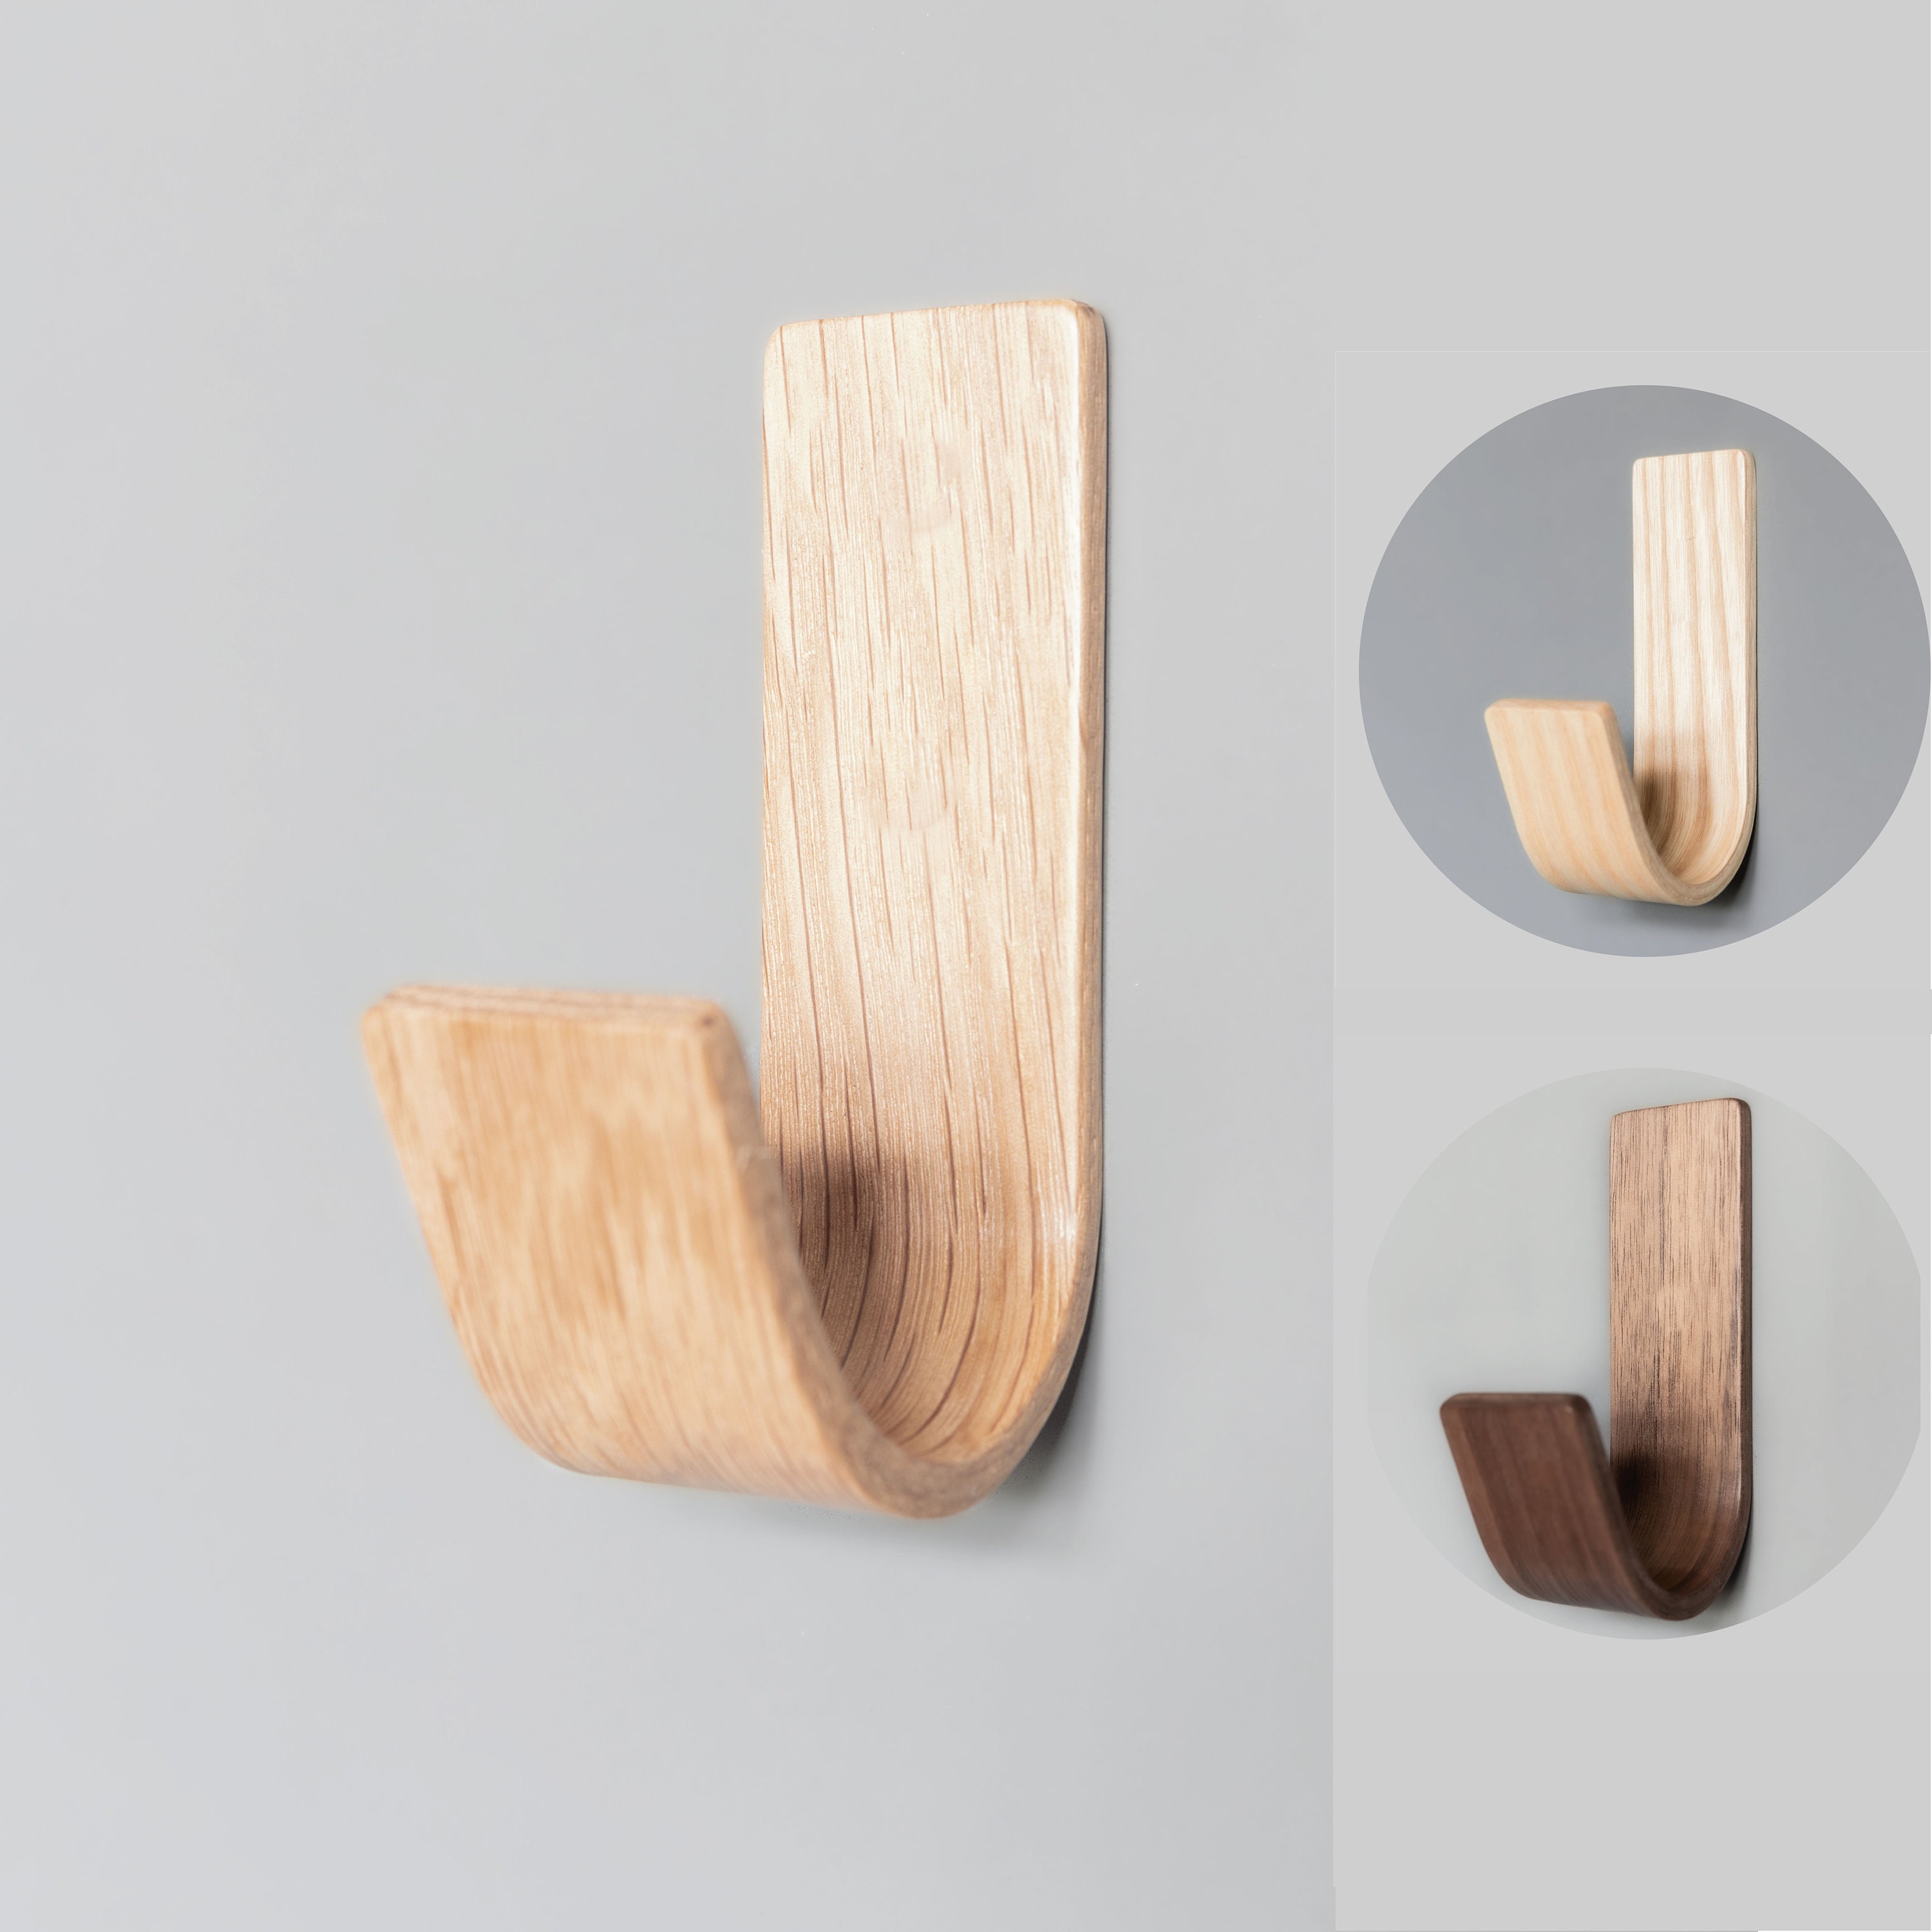 Adhesive Wooden Wall Hooks 1kg Hold Weight Modern Design Damage